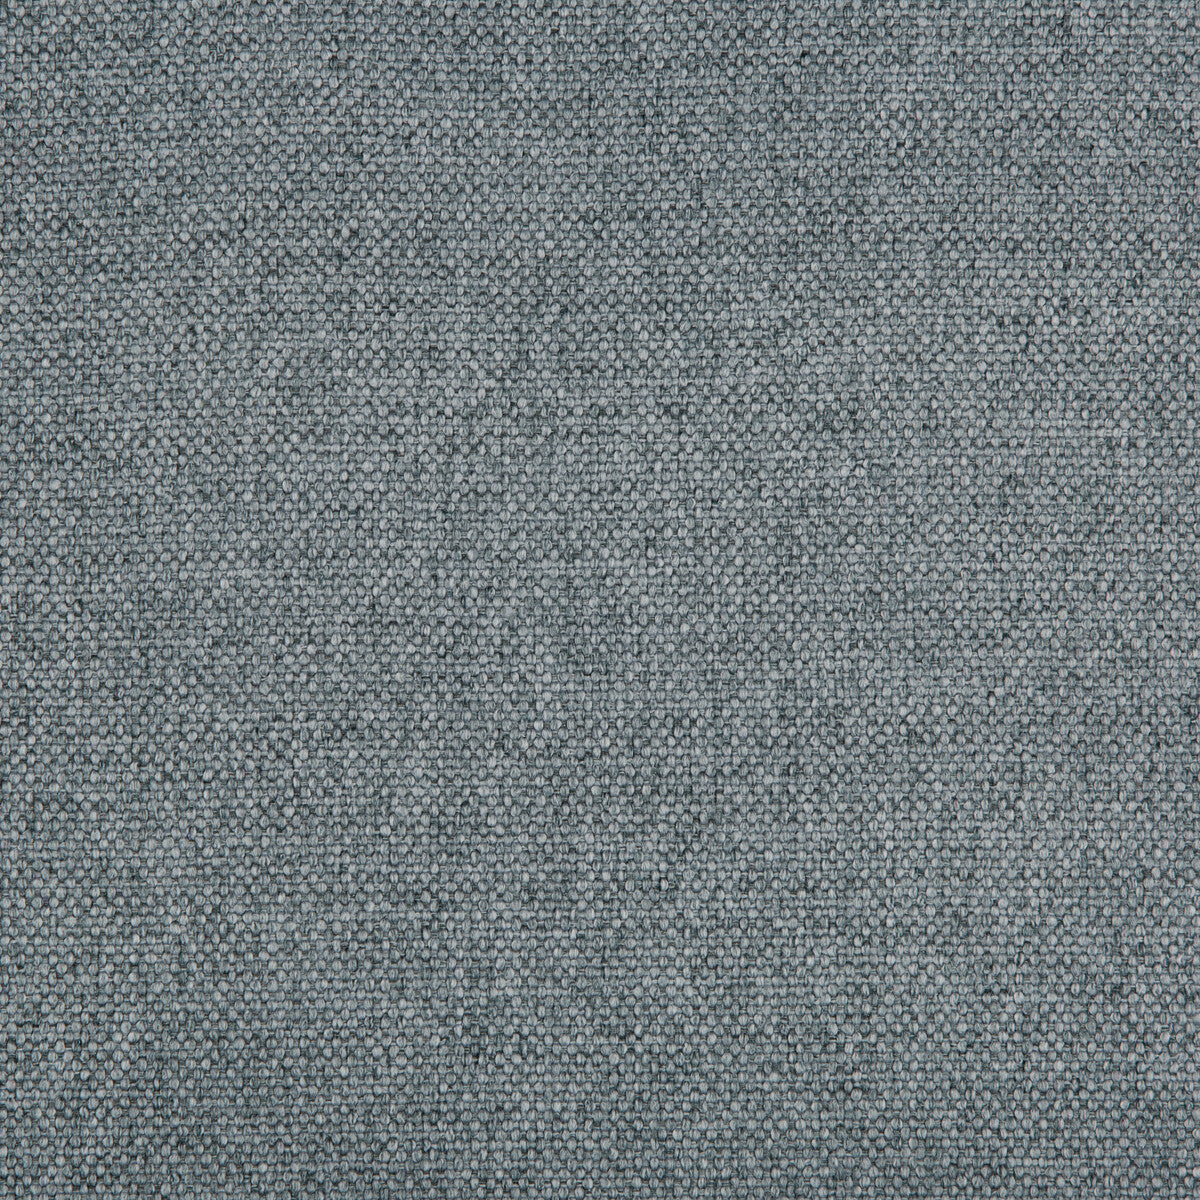 Kravet Contract fabric in 35412-15 color - pattern 35412.15.0 - by Kravet Contract in the Crypton Incase collection